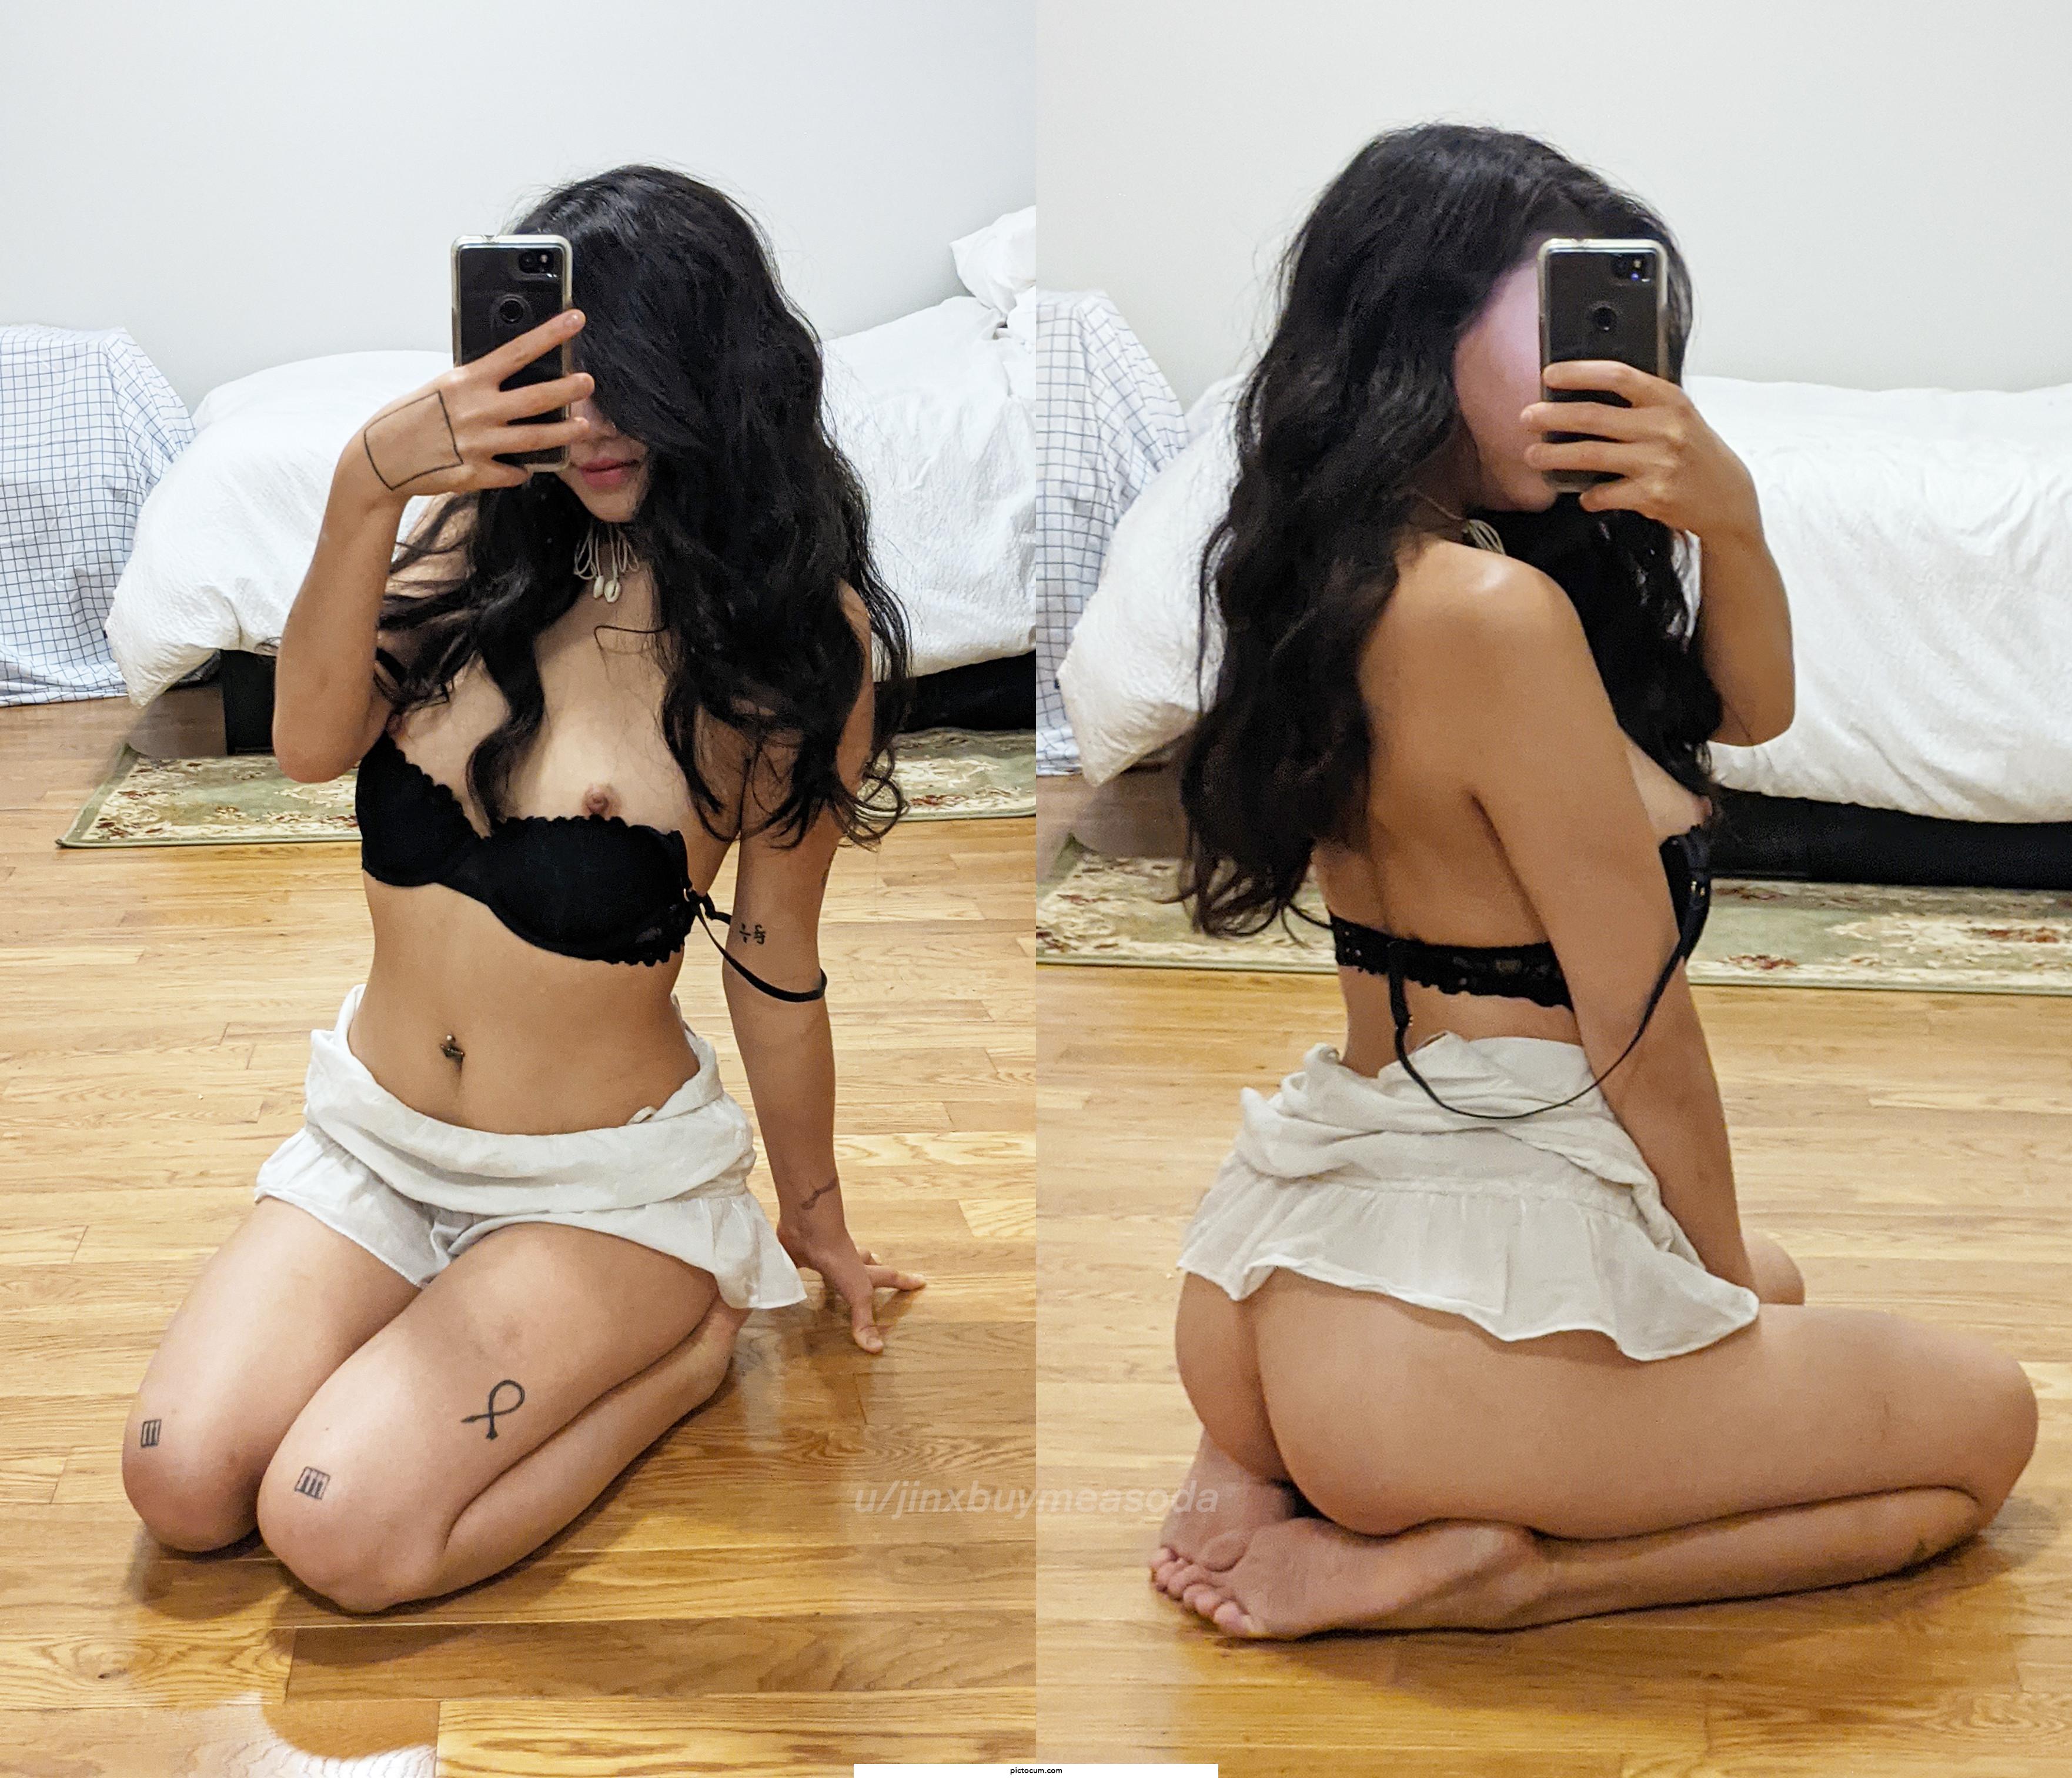 front or back? 💓